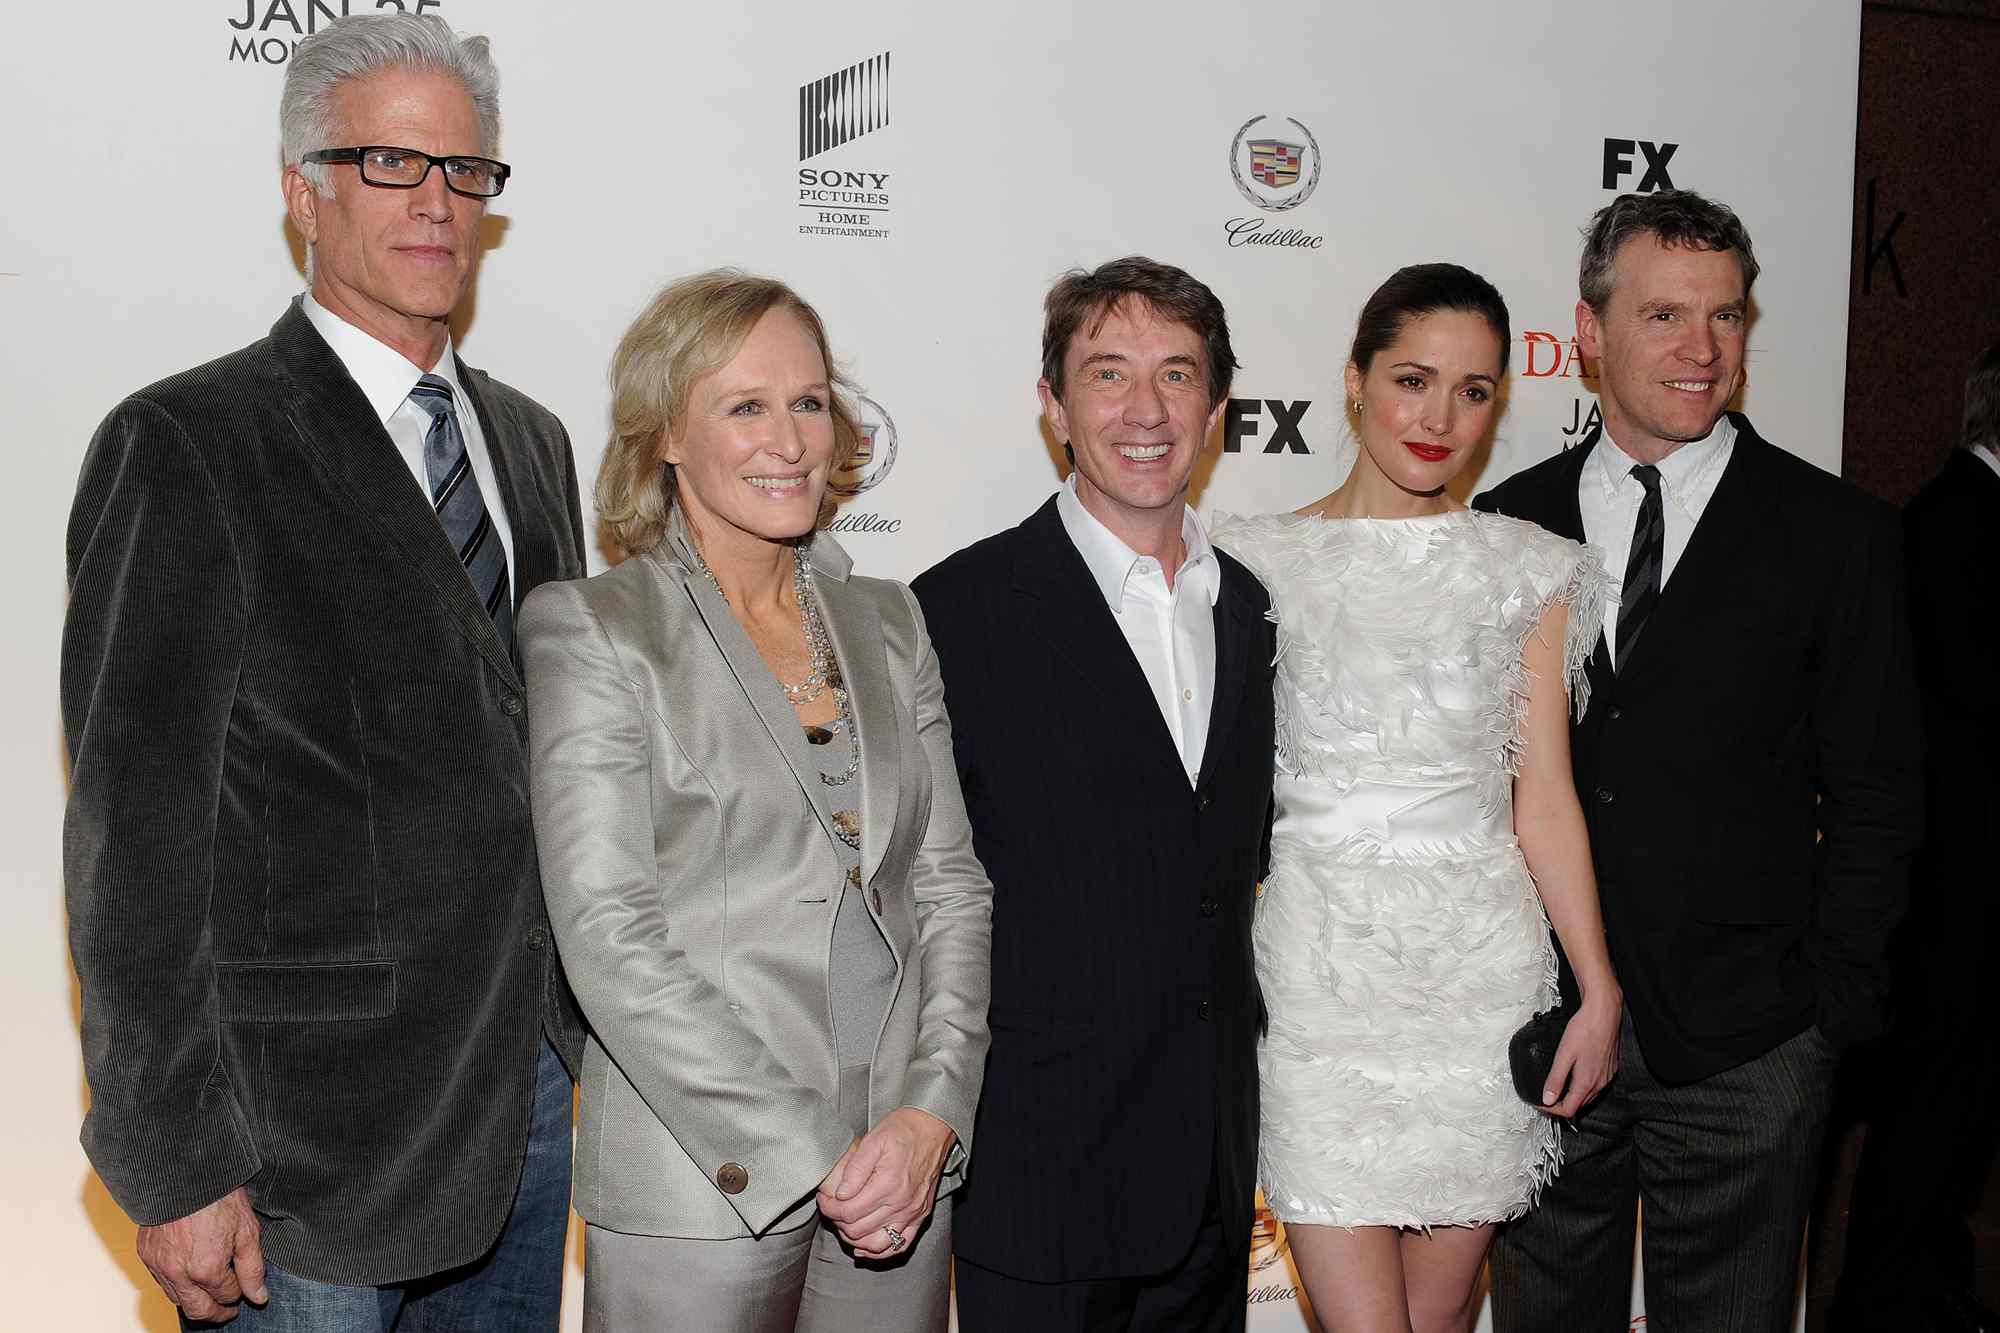 Actors Ted Danson, Glenn Close, Martin Short, Rose Byrne and Tate Donovan attend the Season 3 premiere of "Damages" at the AXA Equitable Center on January 19, 2010 in New York City.